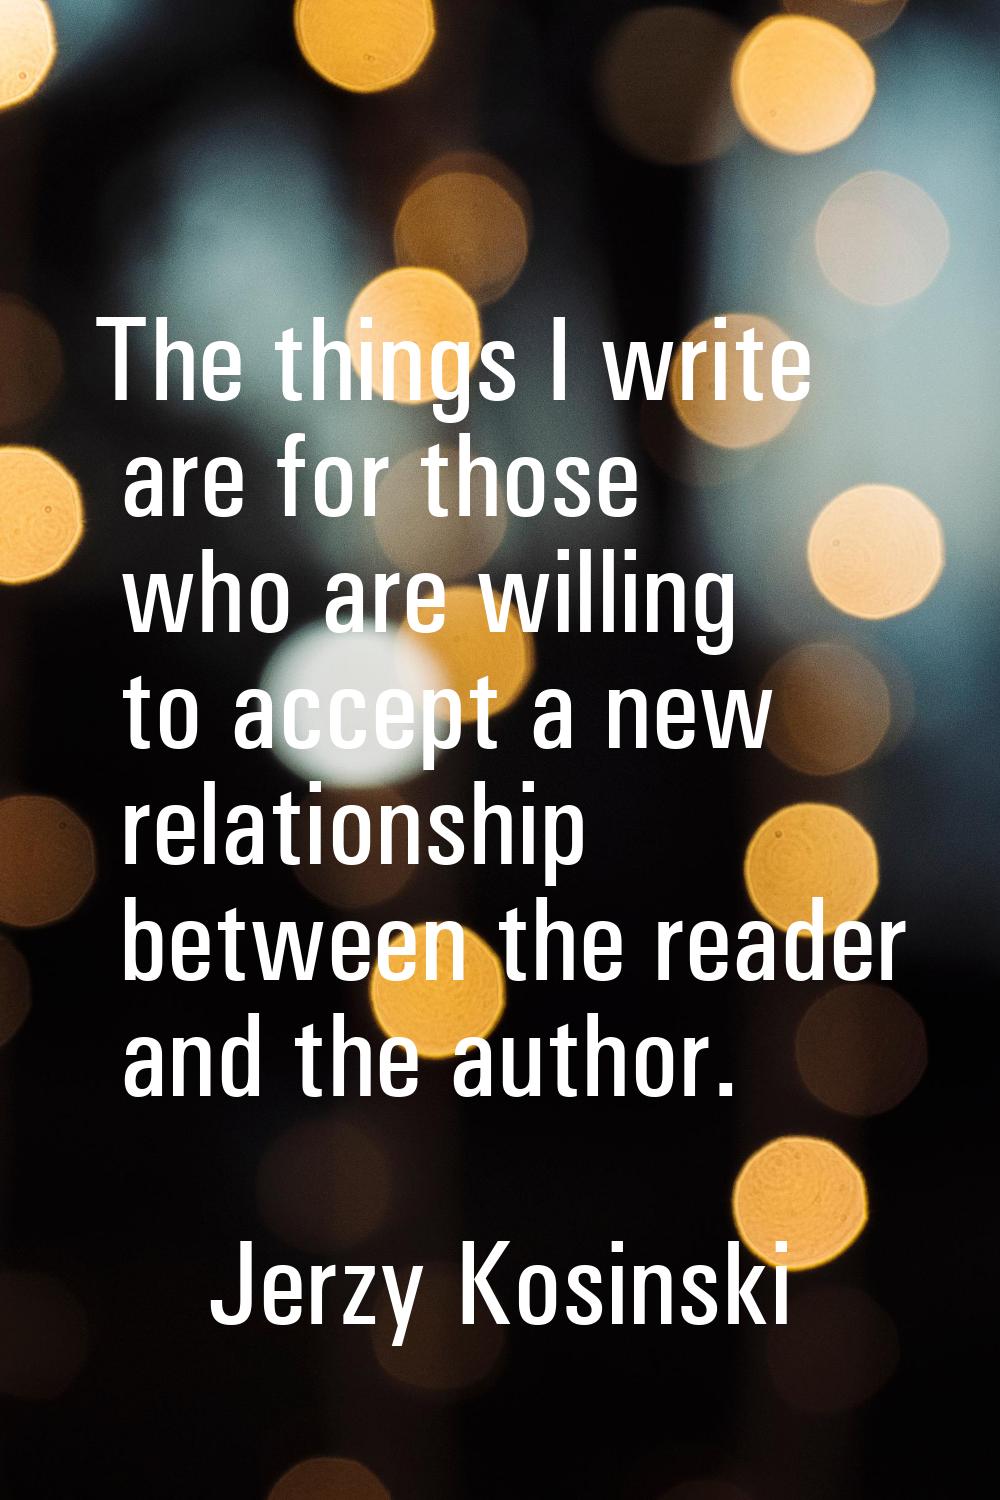 The things I write are for those who are willing to accept a new relationship between the reader an